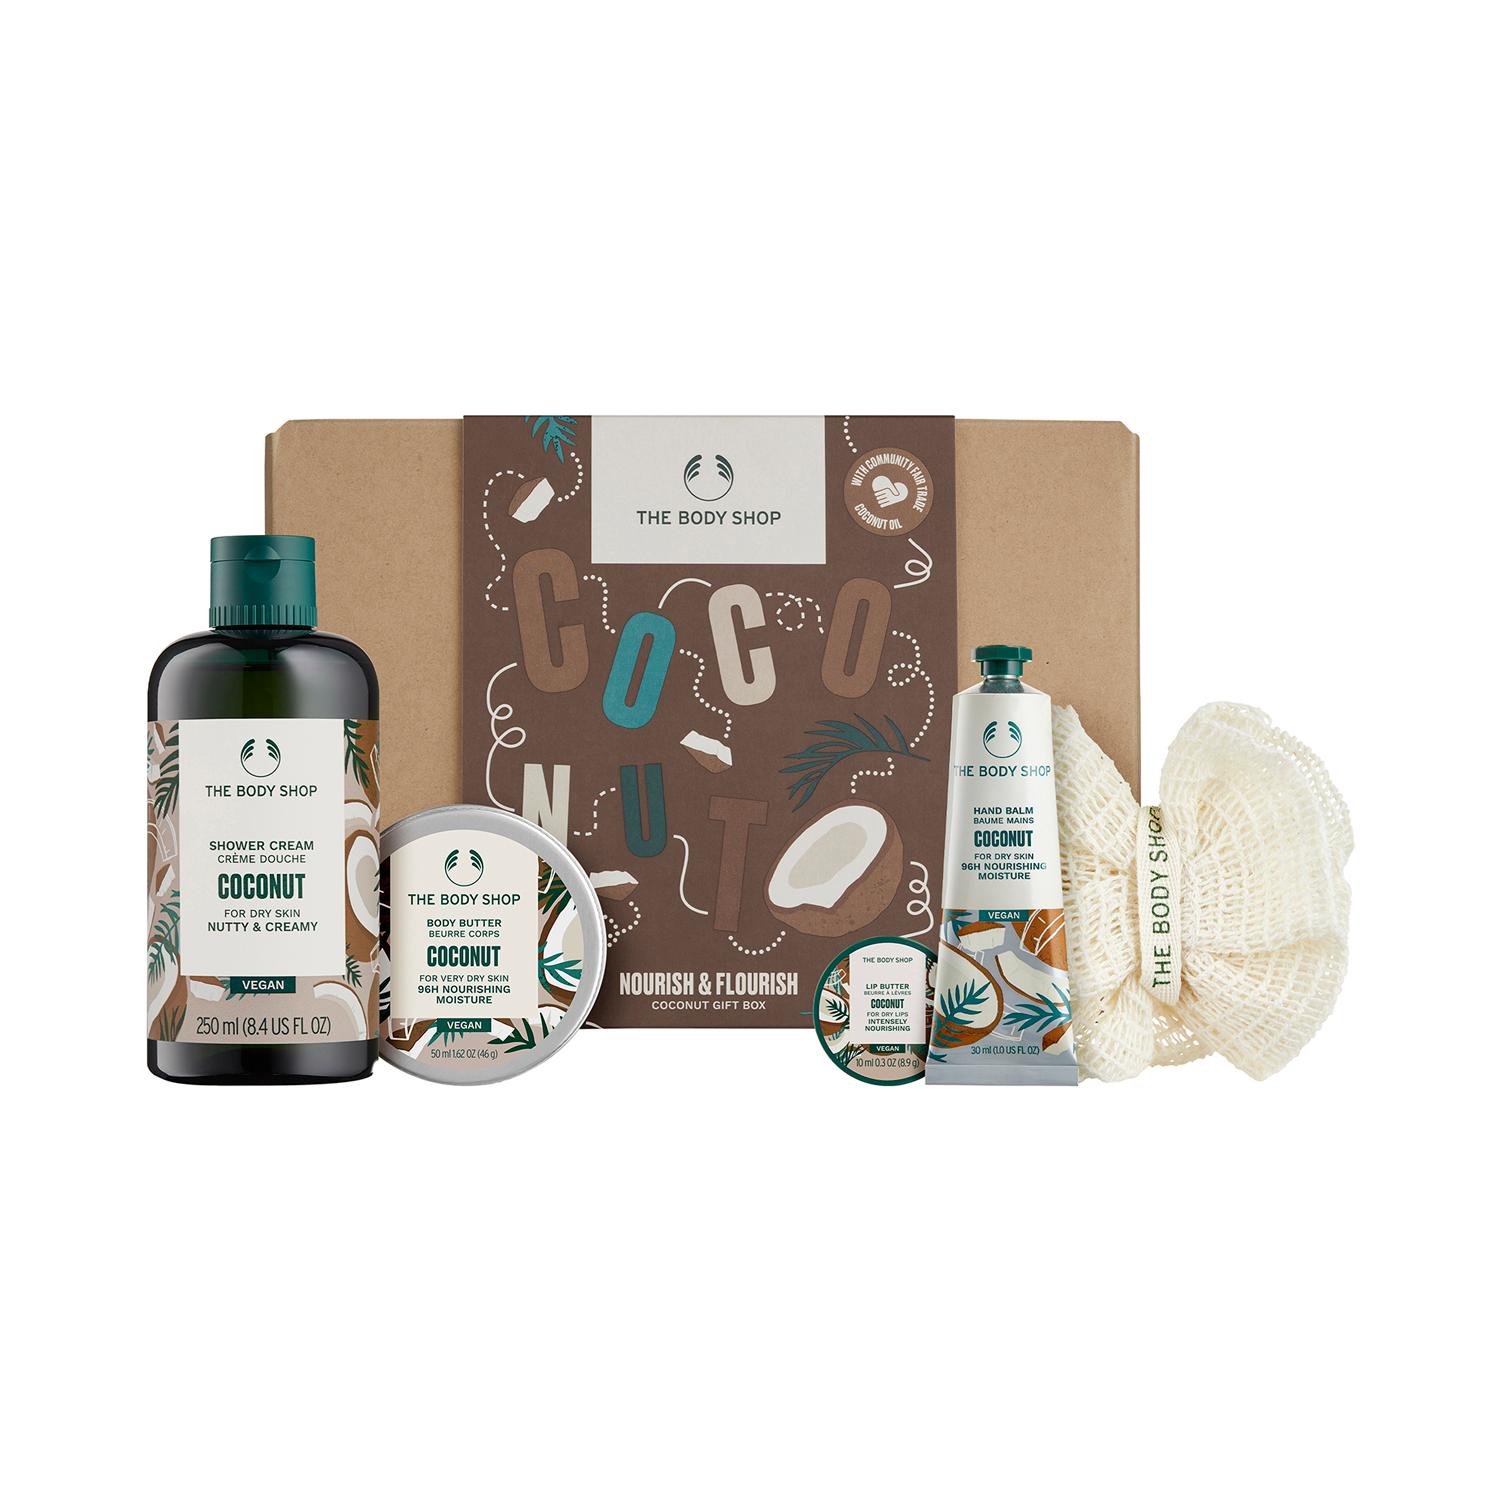 The Body Shop | The Body Shop Coconut Small Gift Set (6 pcs)